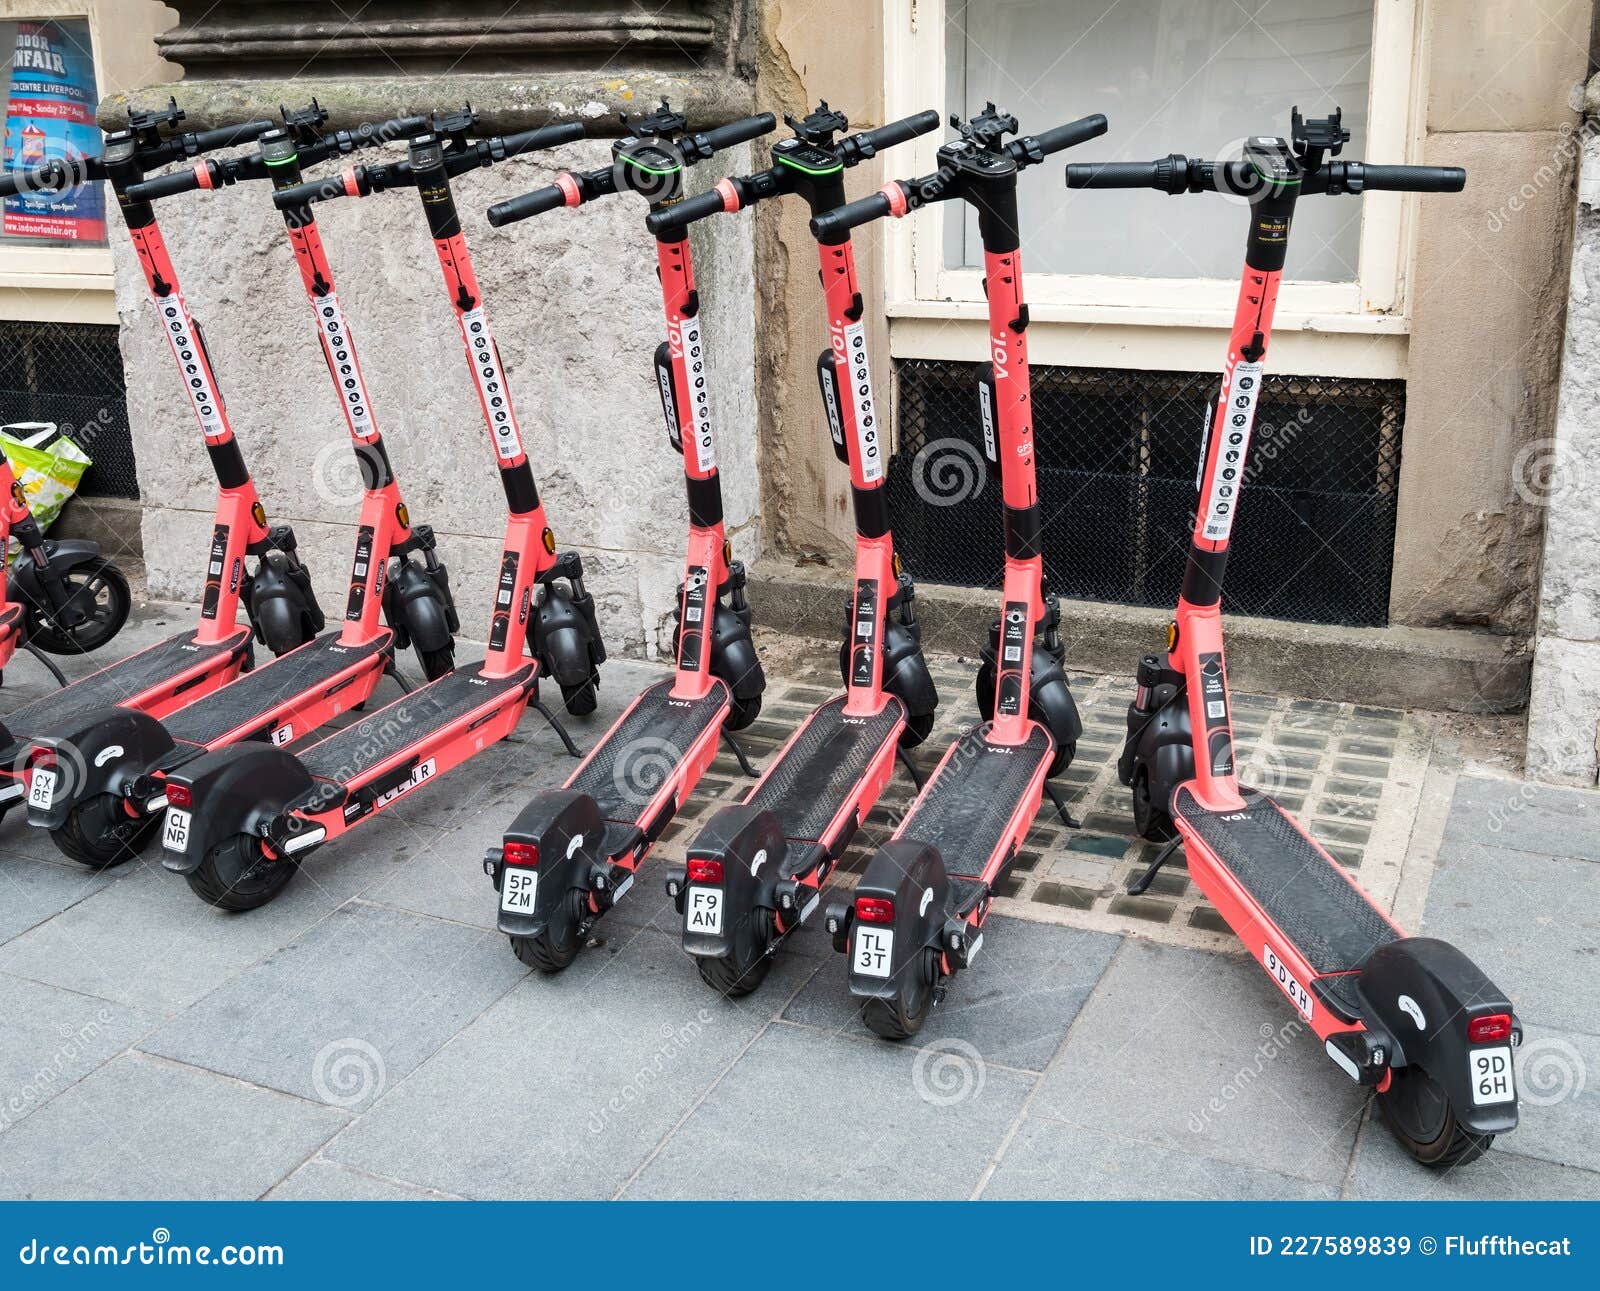 113 Voi Scooters Stock Photos - Free & Royalty-Free Stock Photos Dreamstime